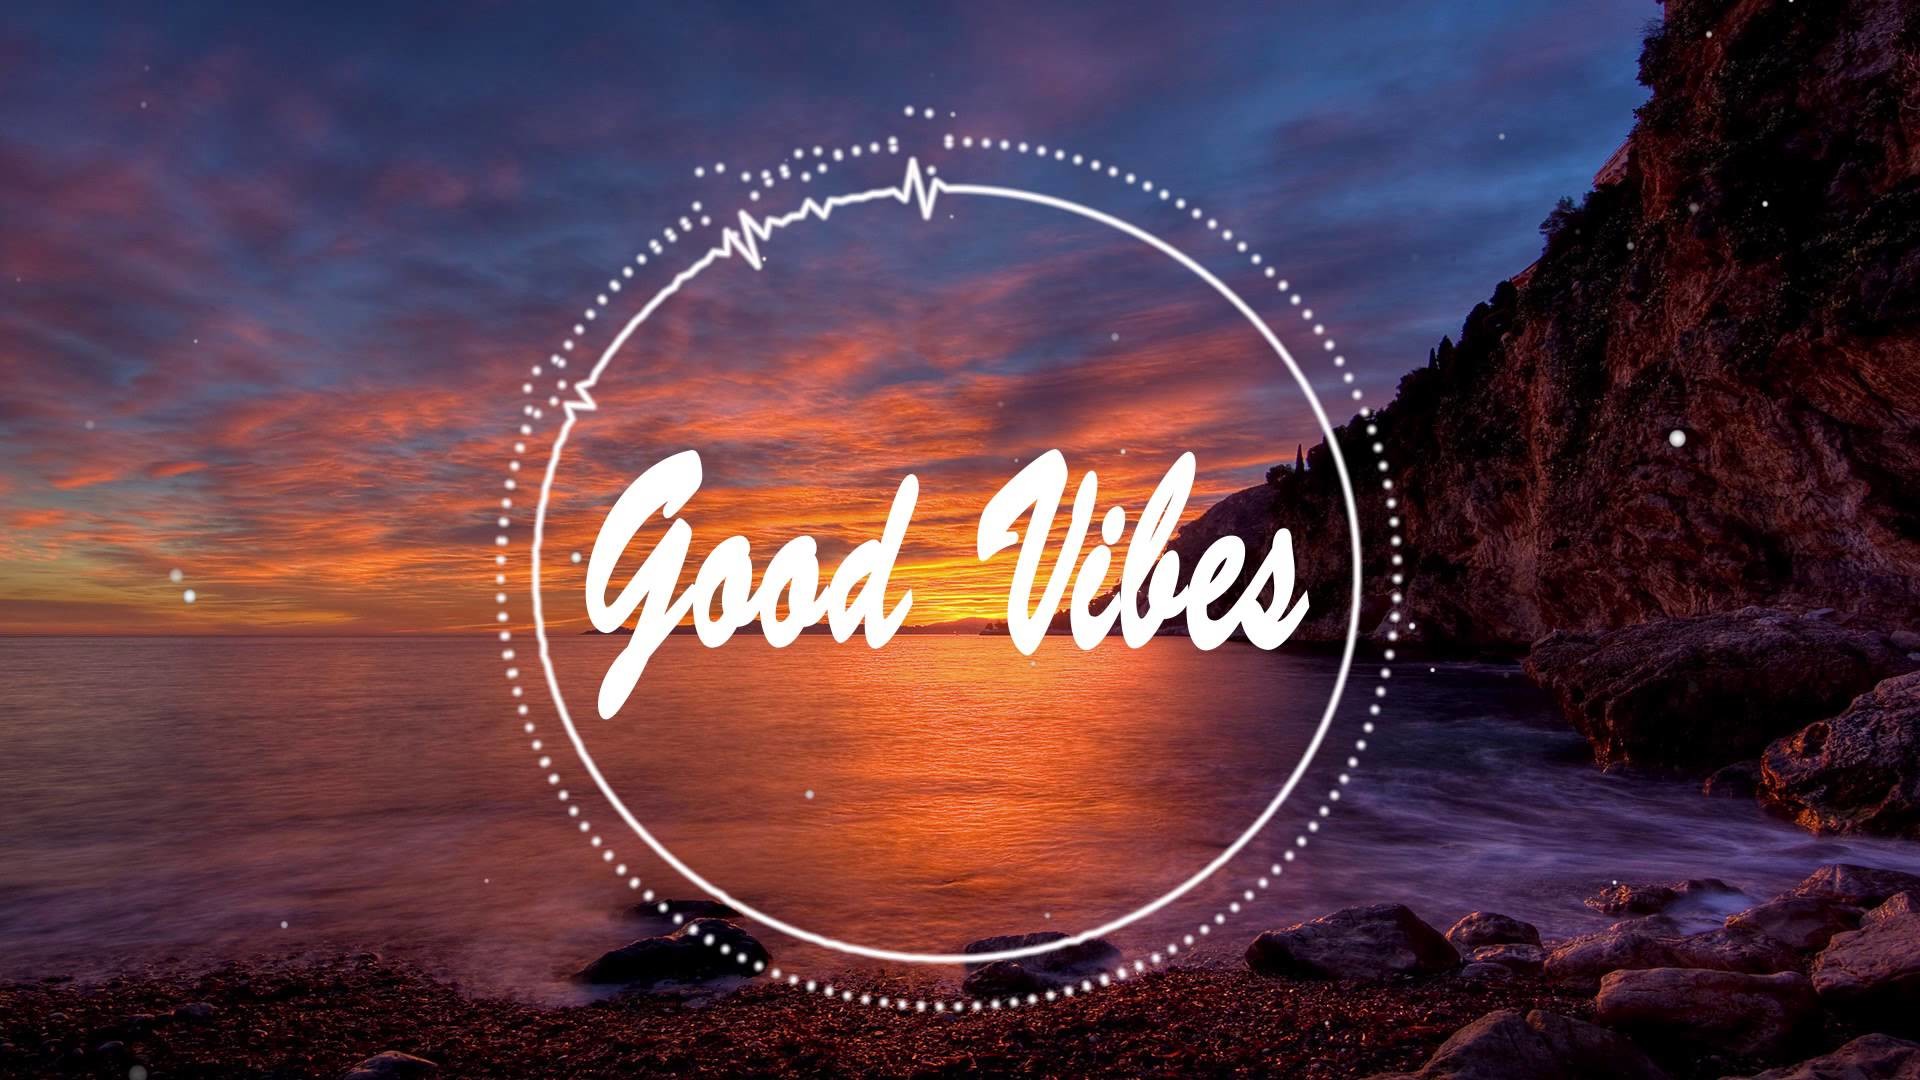 Good Vibes Wallpaper (72+ images)